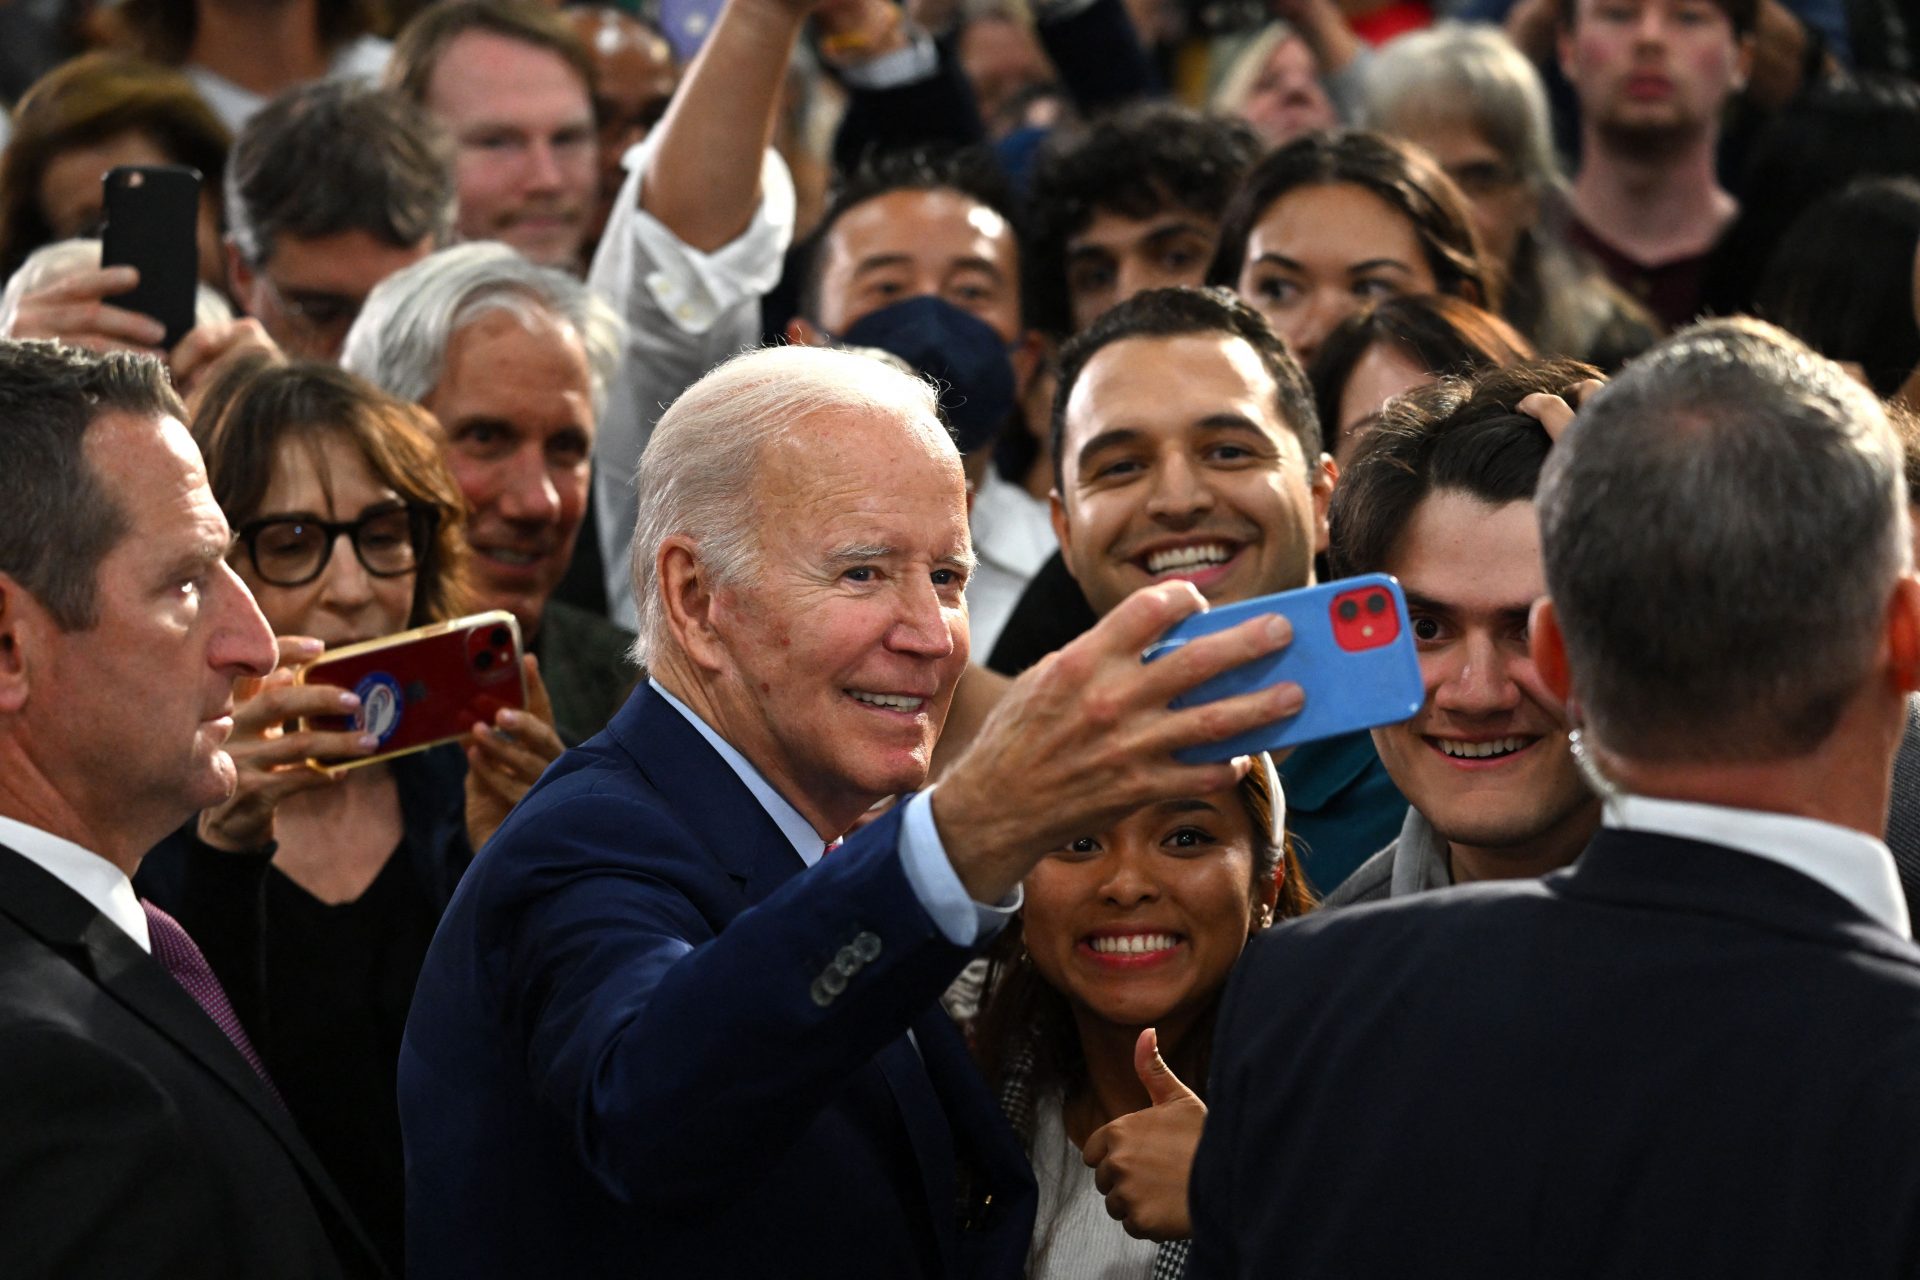 Young voters were key for Biden in 2020 